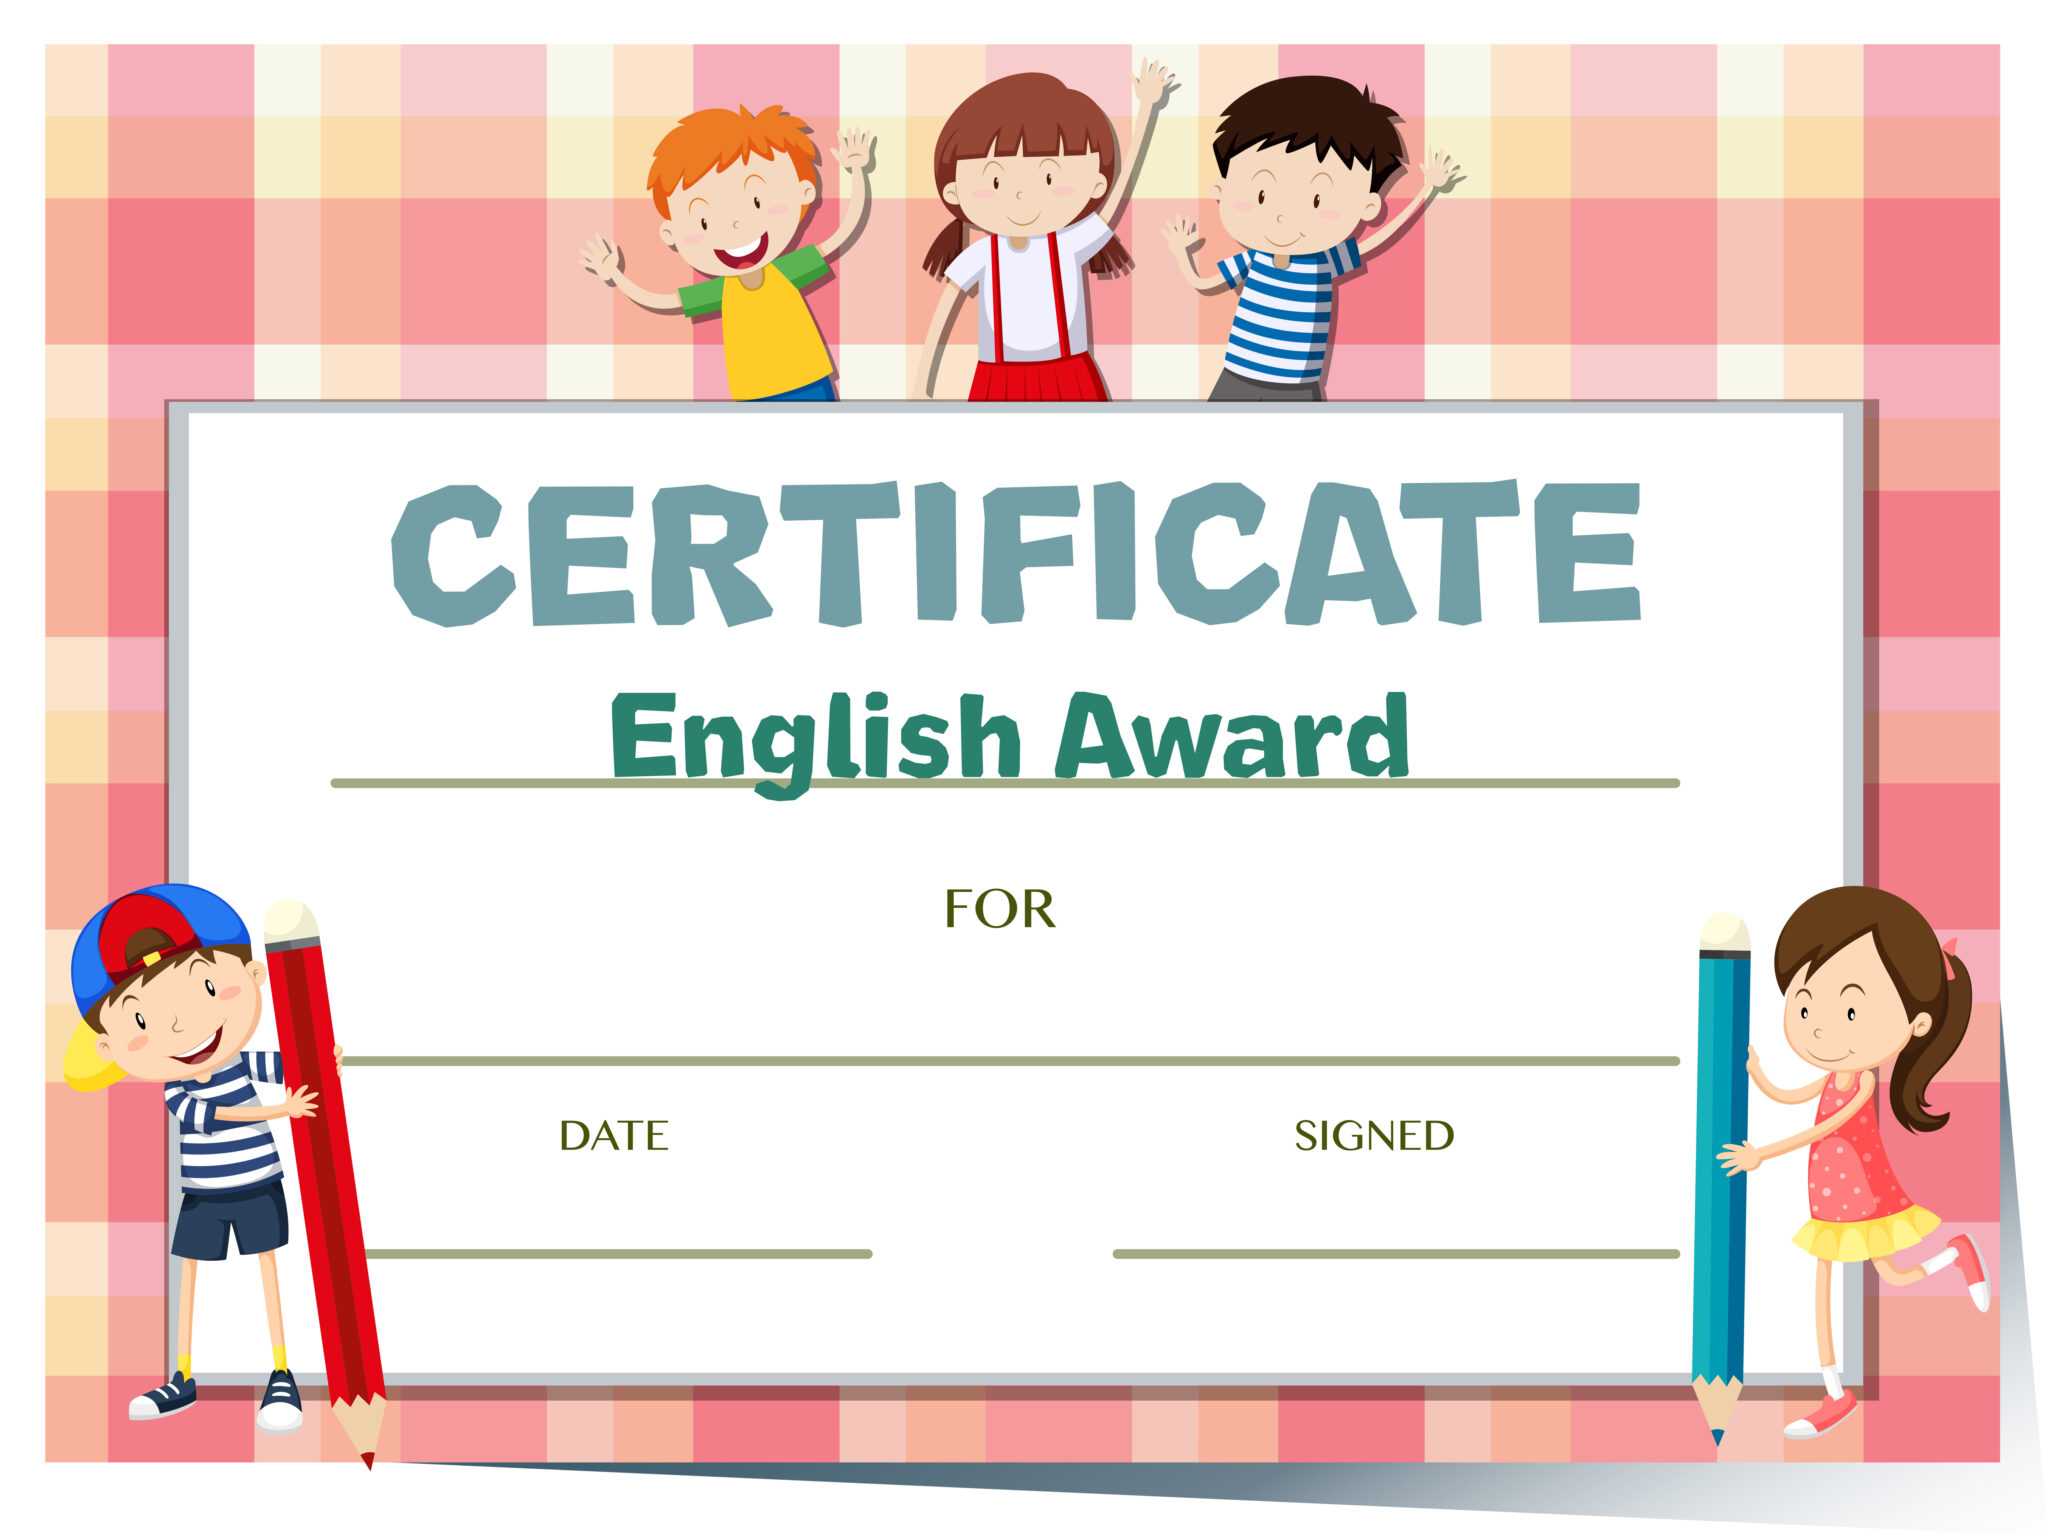 Certificate Template For English Award With Many Kids with Math